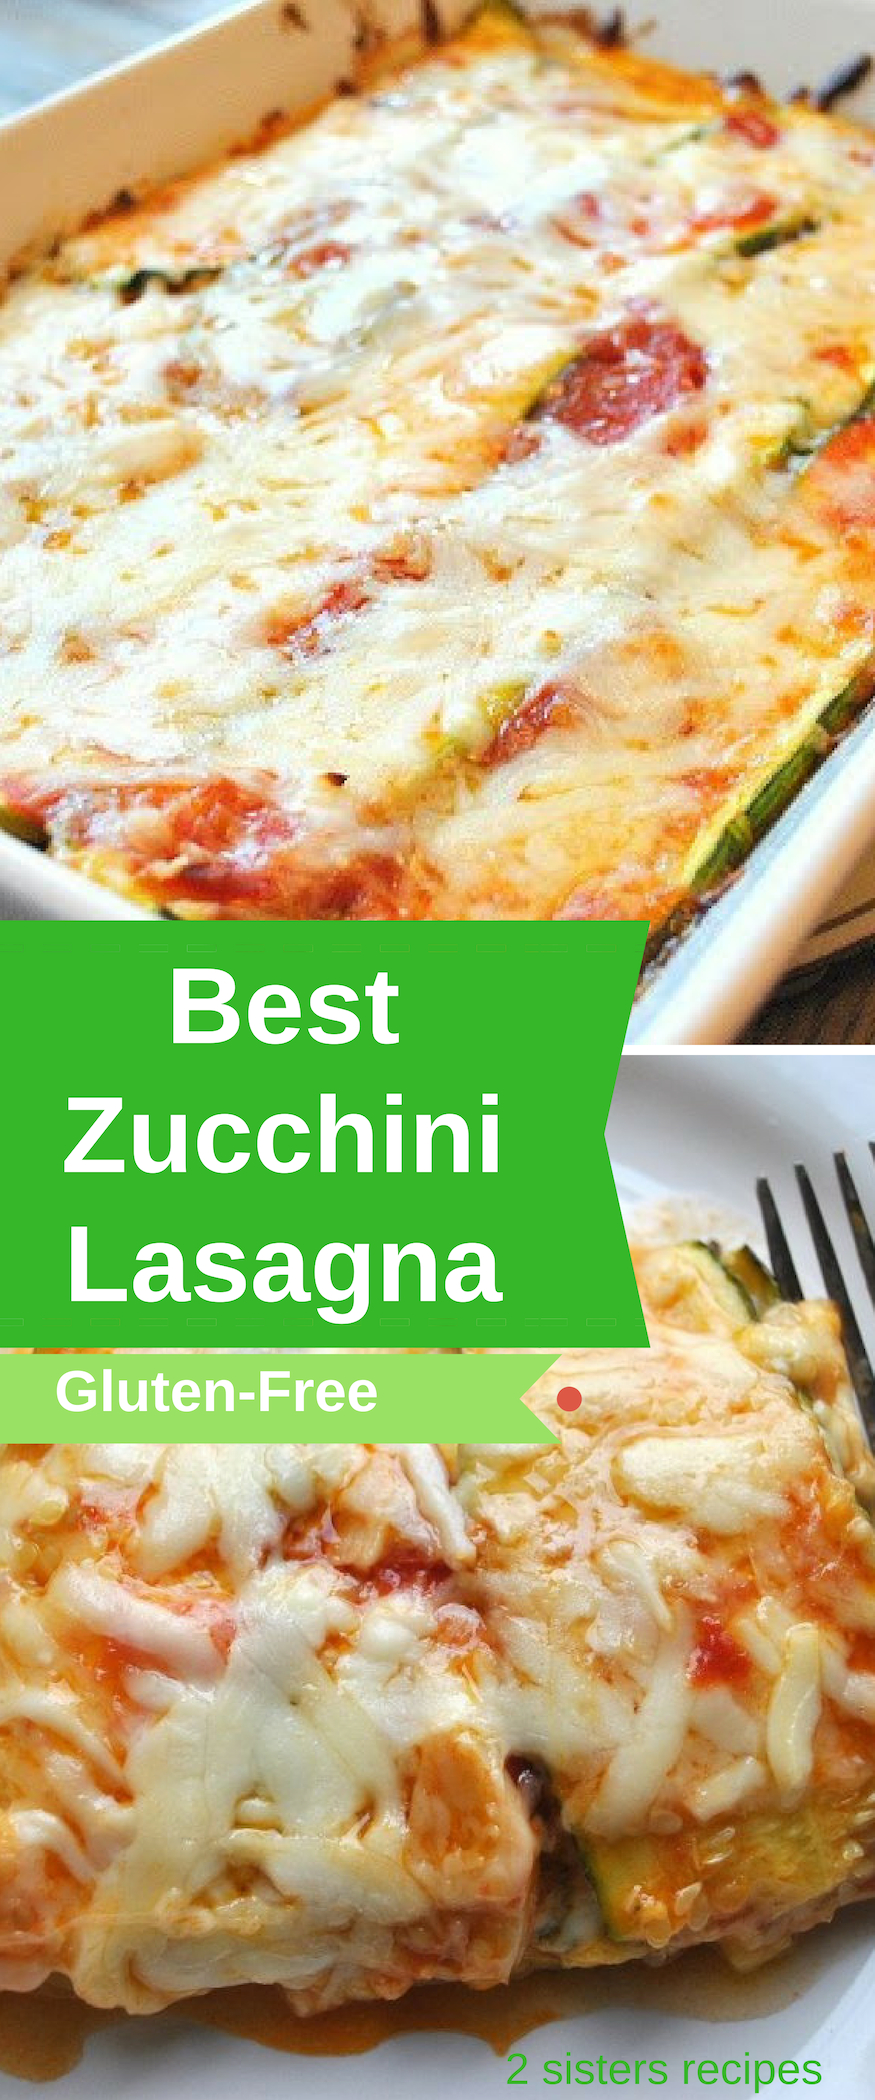 Best Zucchini Lasagna - without Noodles! - 2 Sisters Recipes by Anna ...